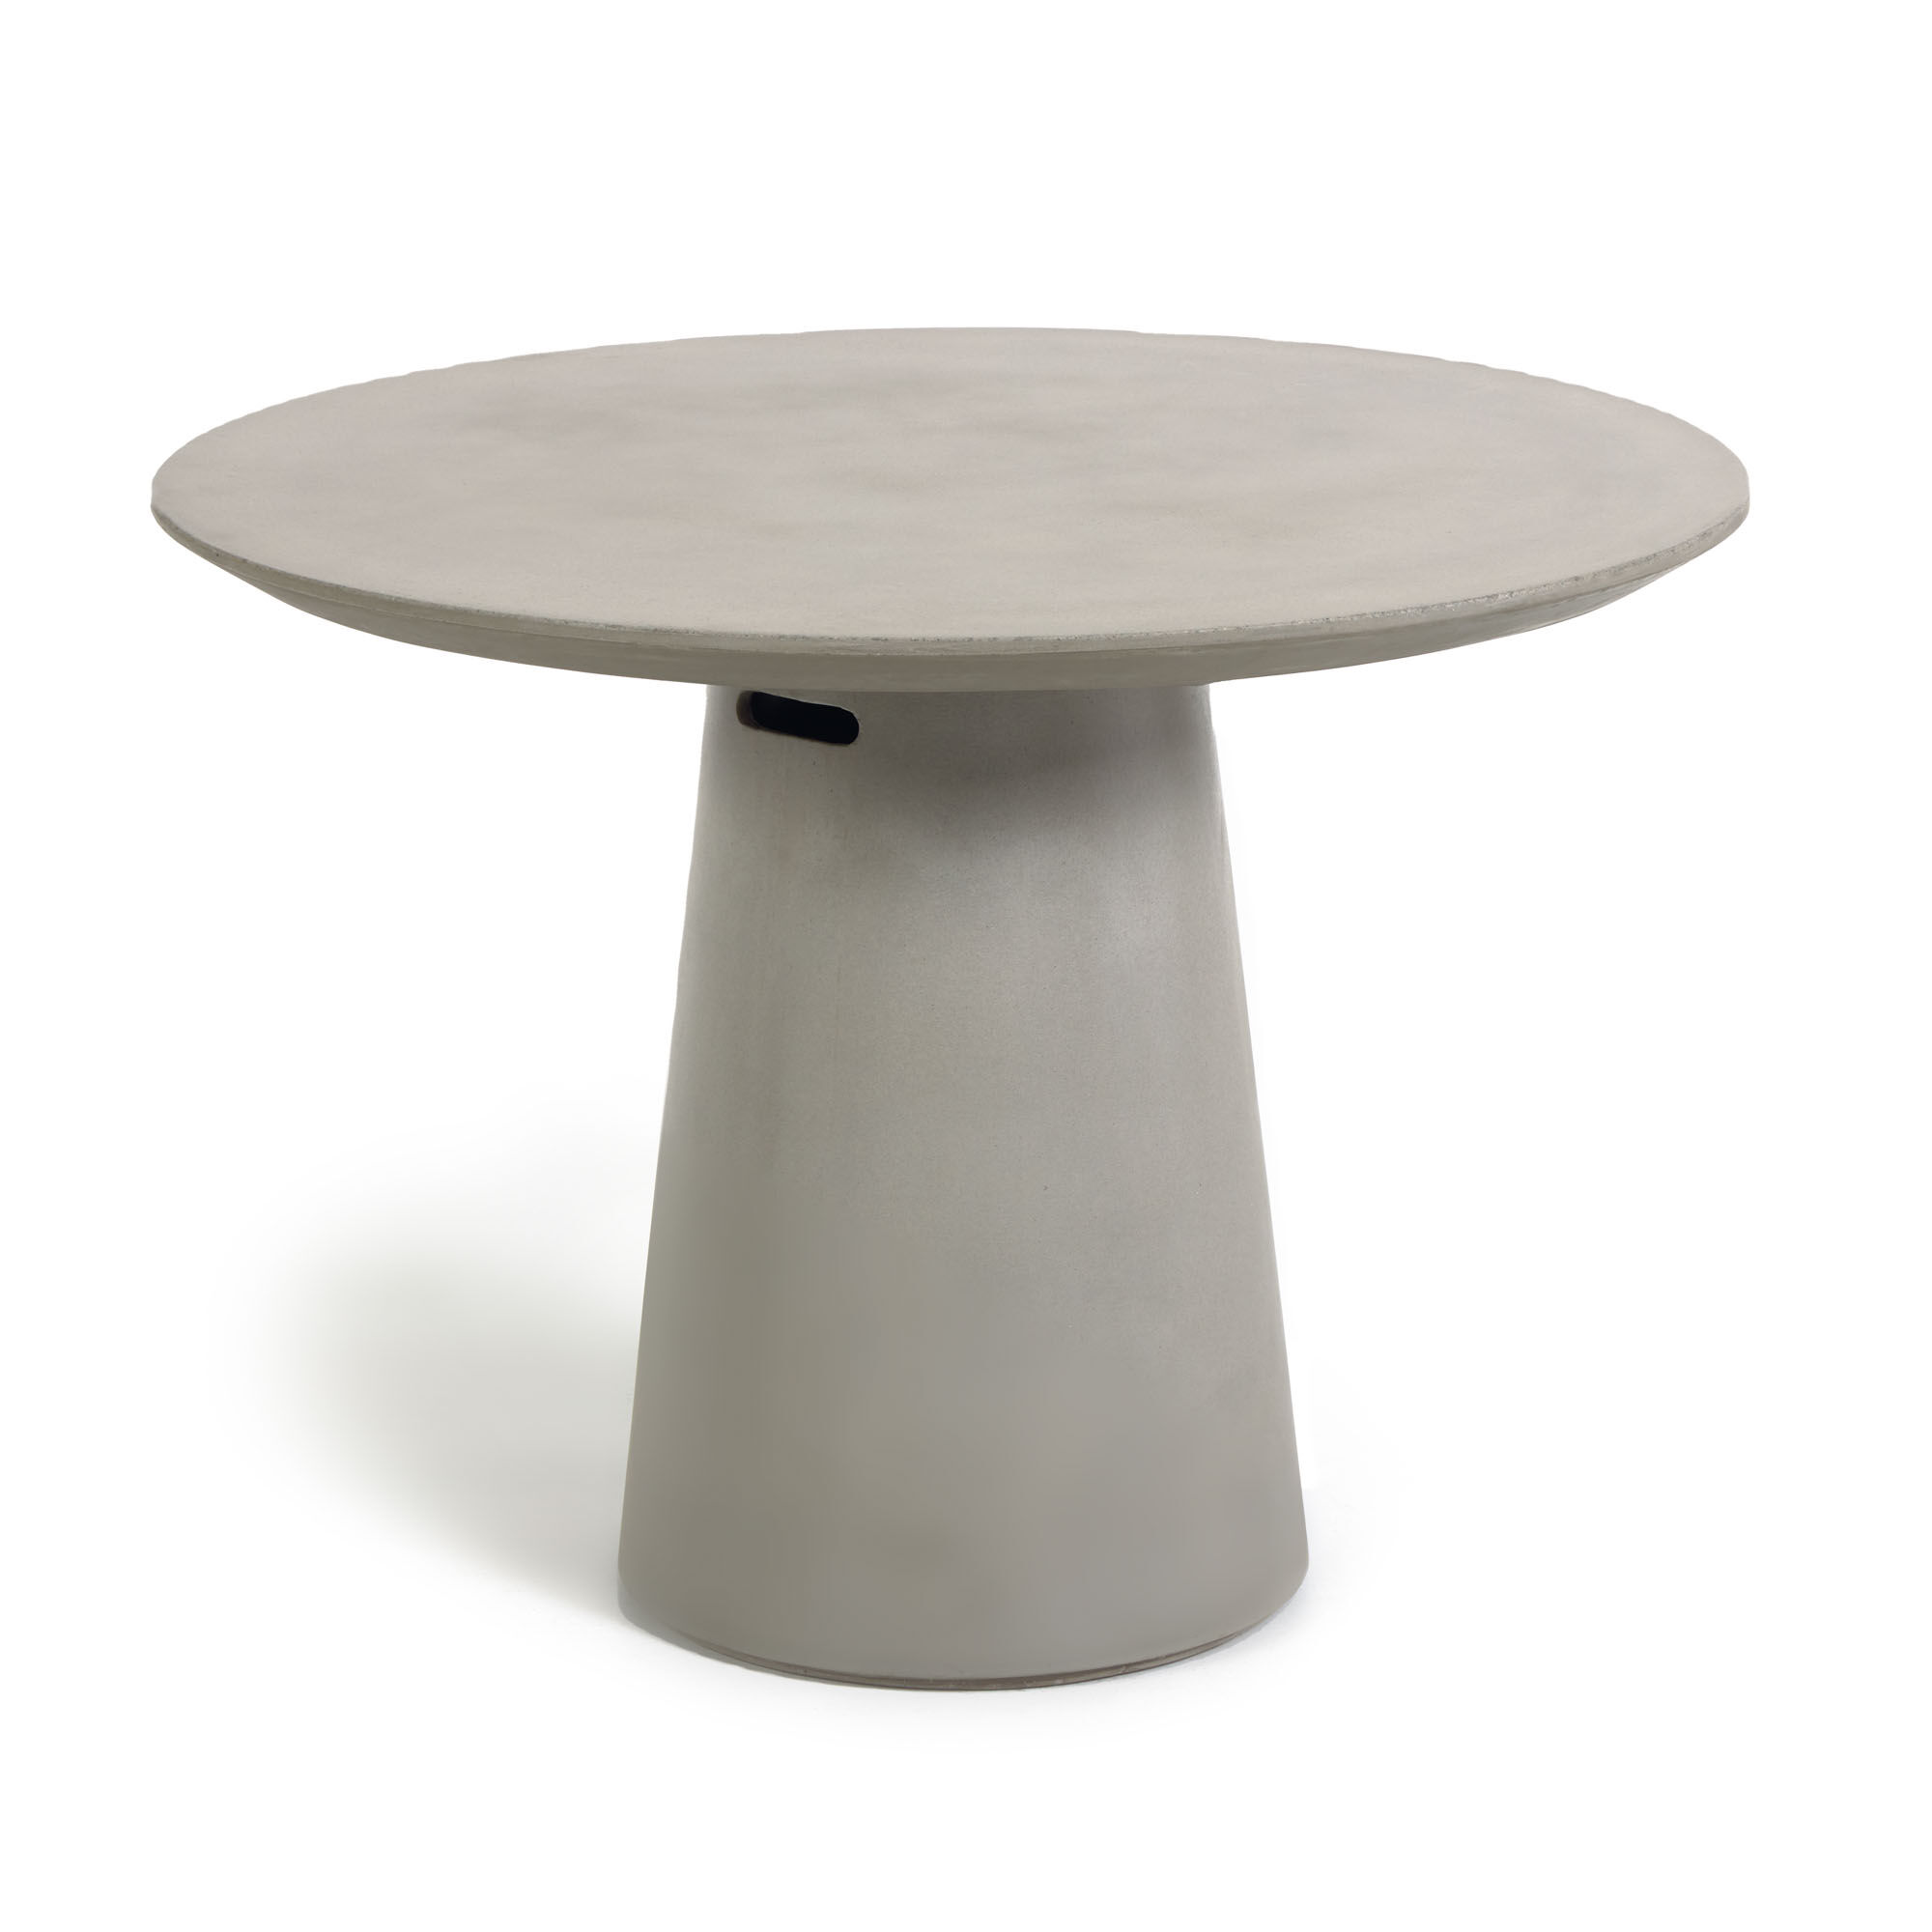 Kave Home Itai cement table, 120 cm